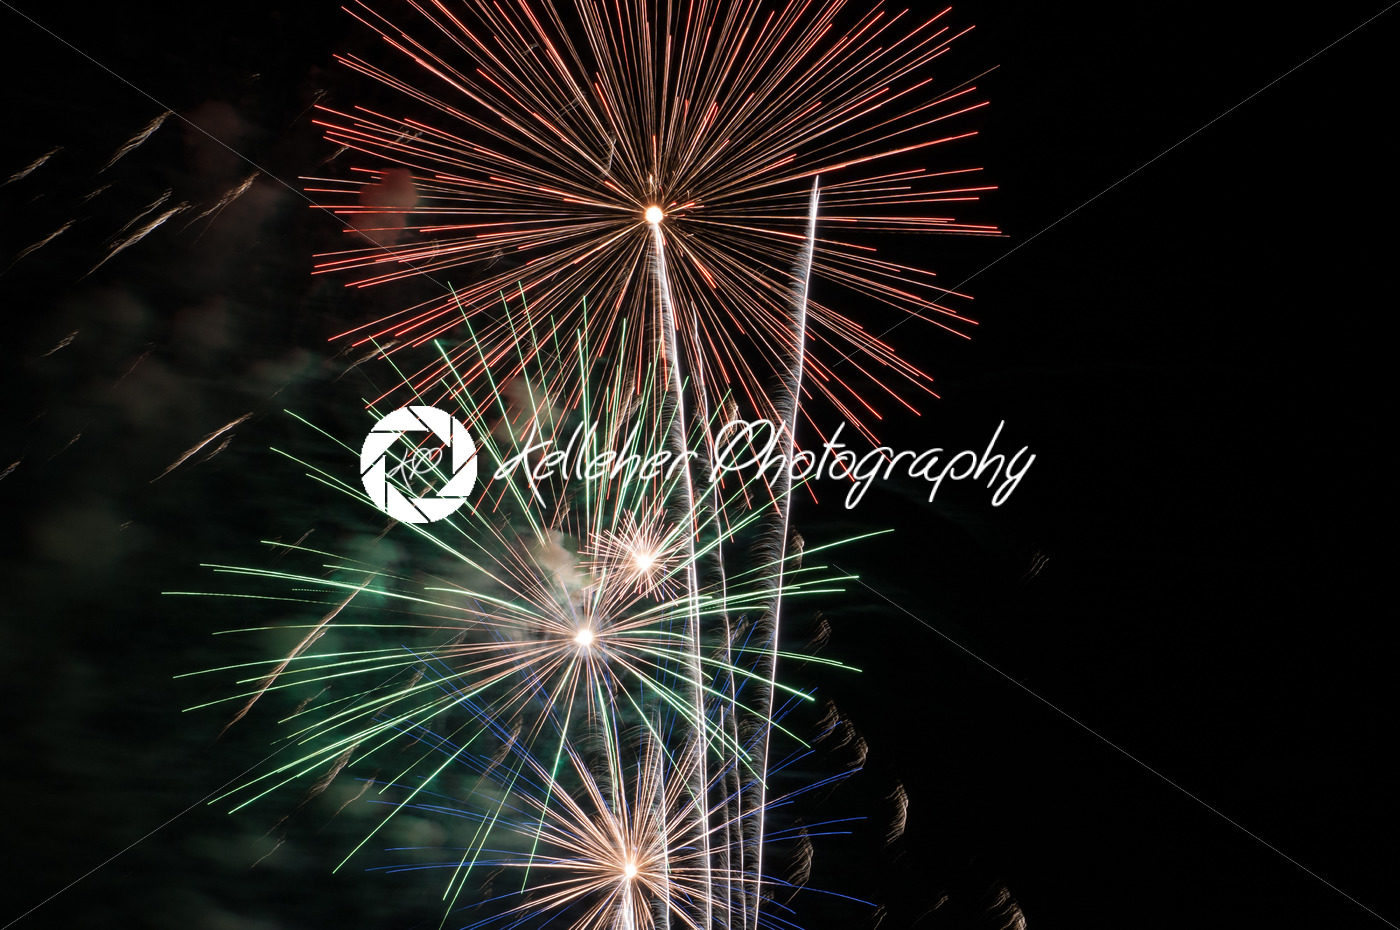 Fireworks light up the sky with dazzling display - Kelleher Photography Store